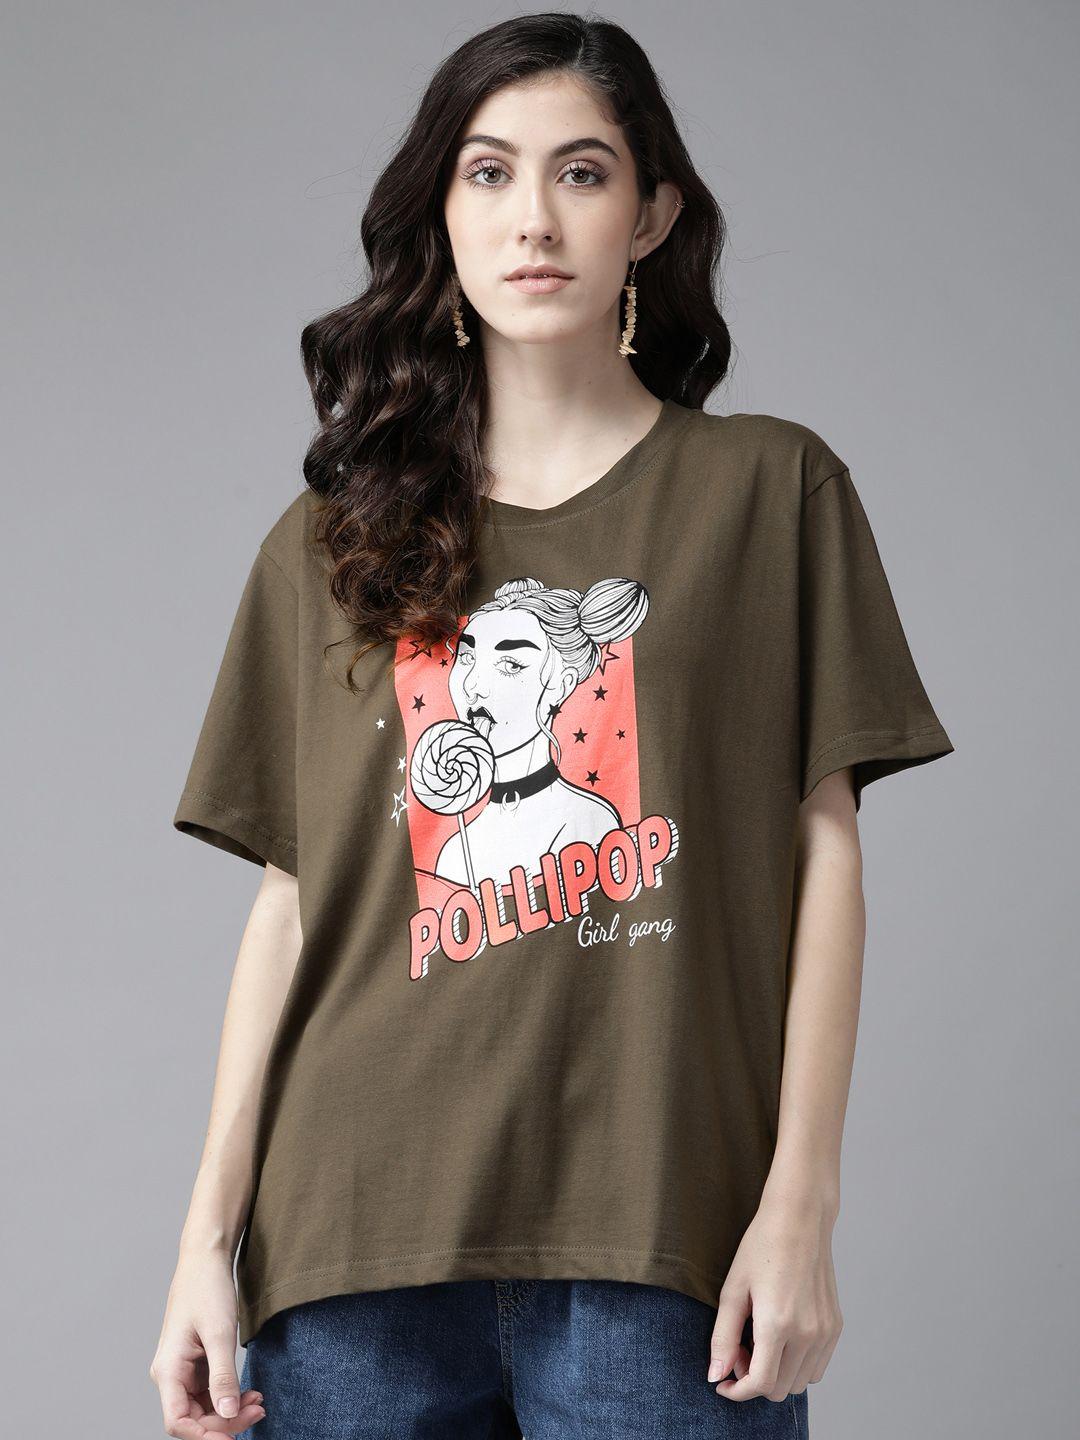 the dry state women olive green & white cotton printed oversized t-shirt